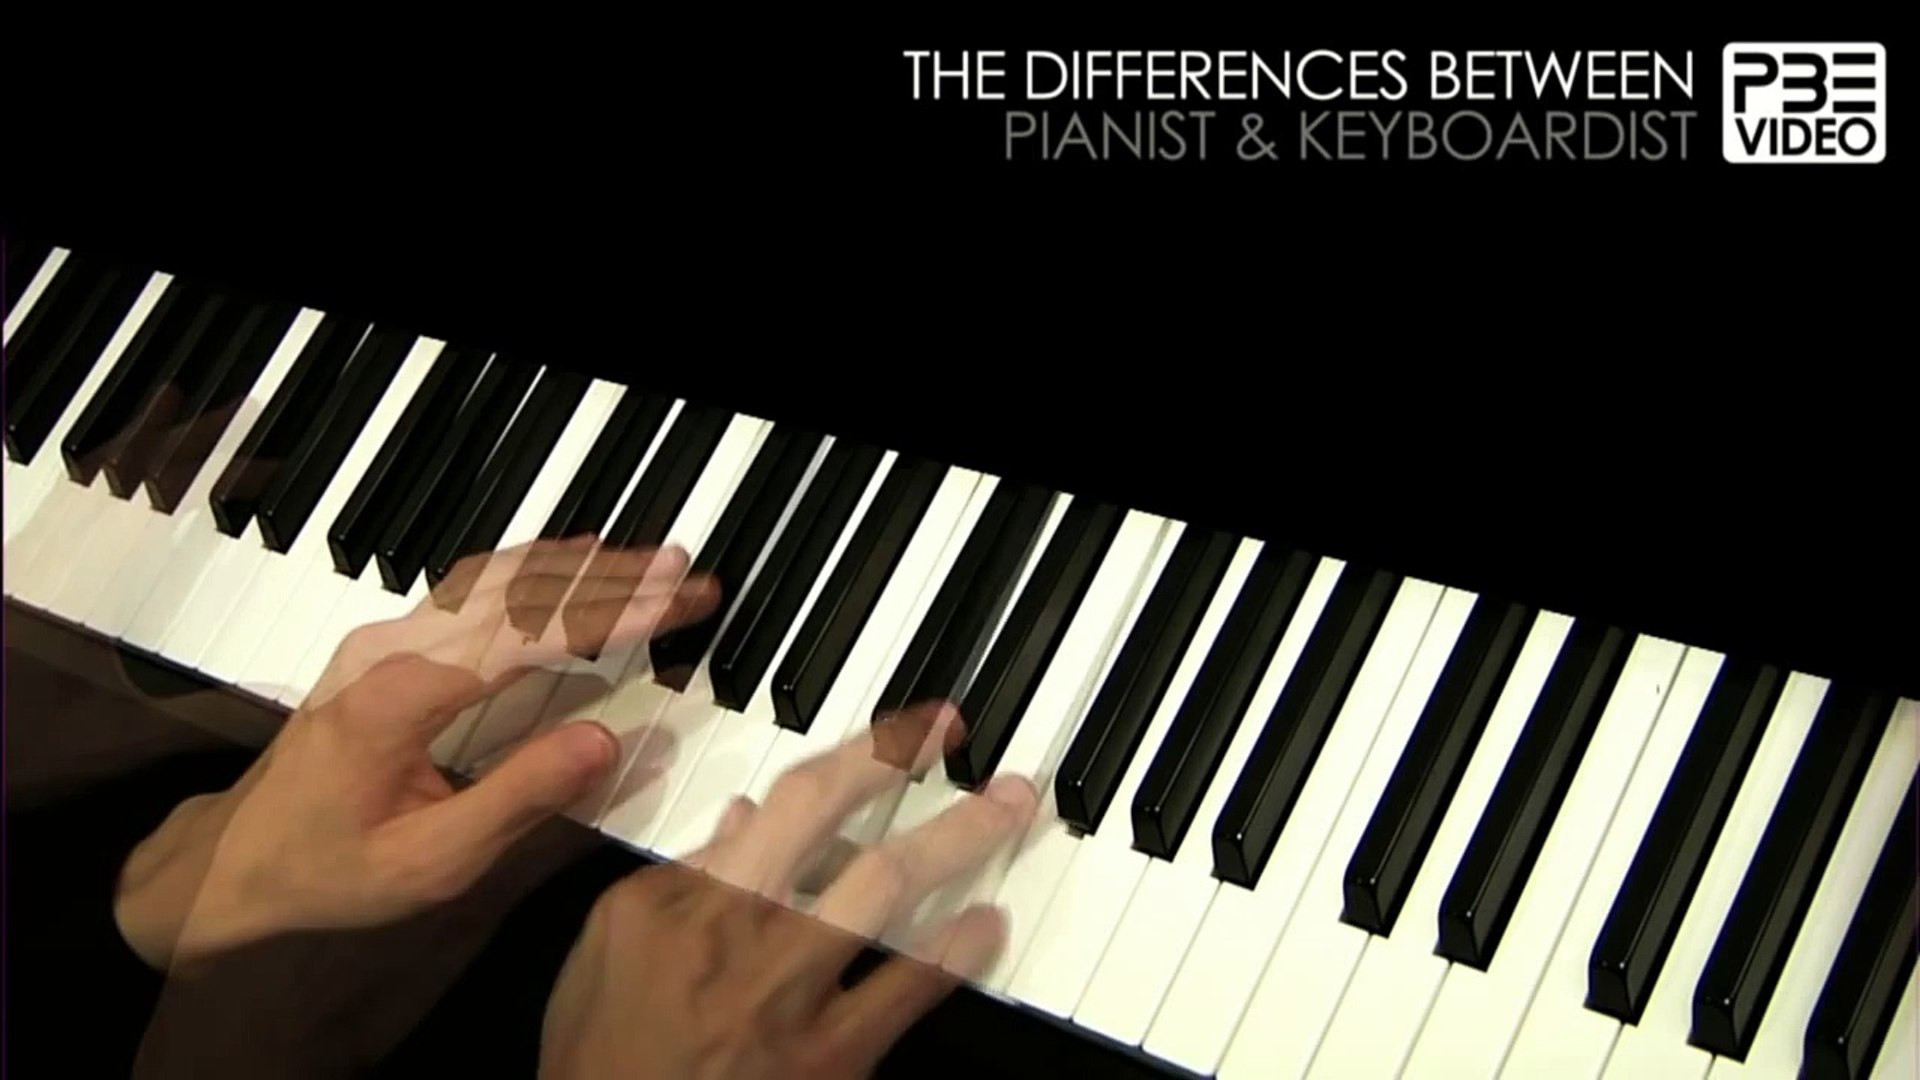 The differences between pianist & keyboardist